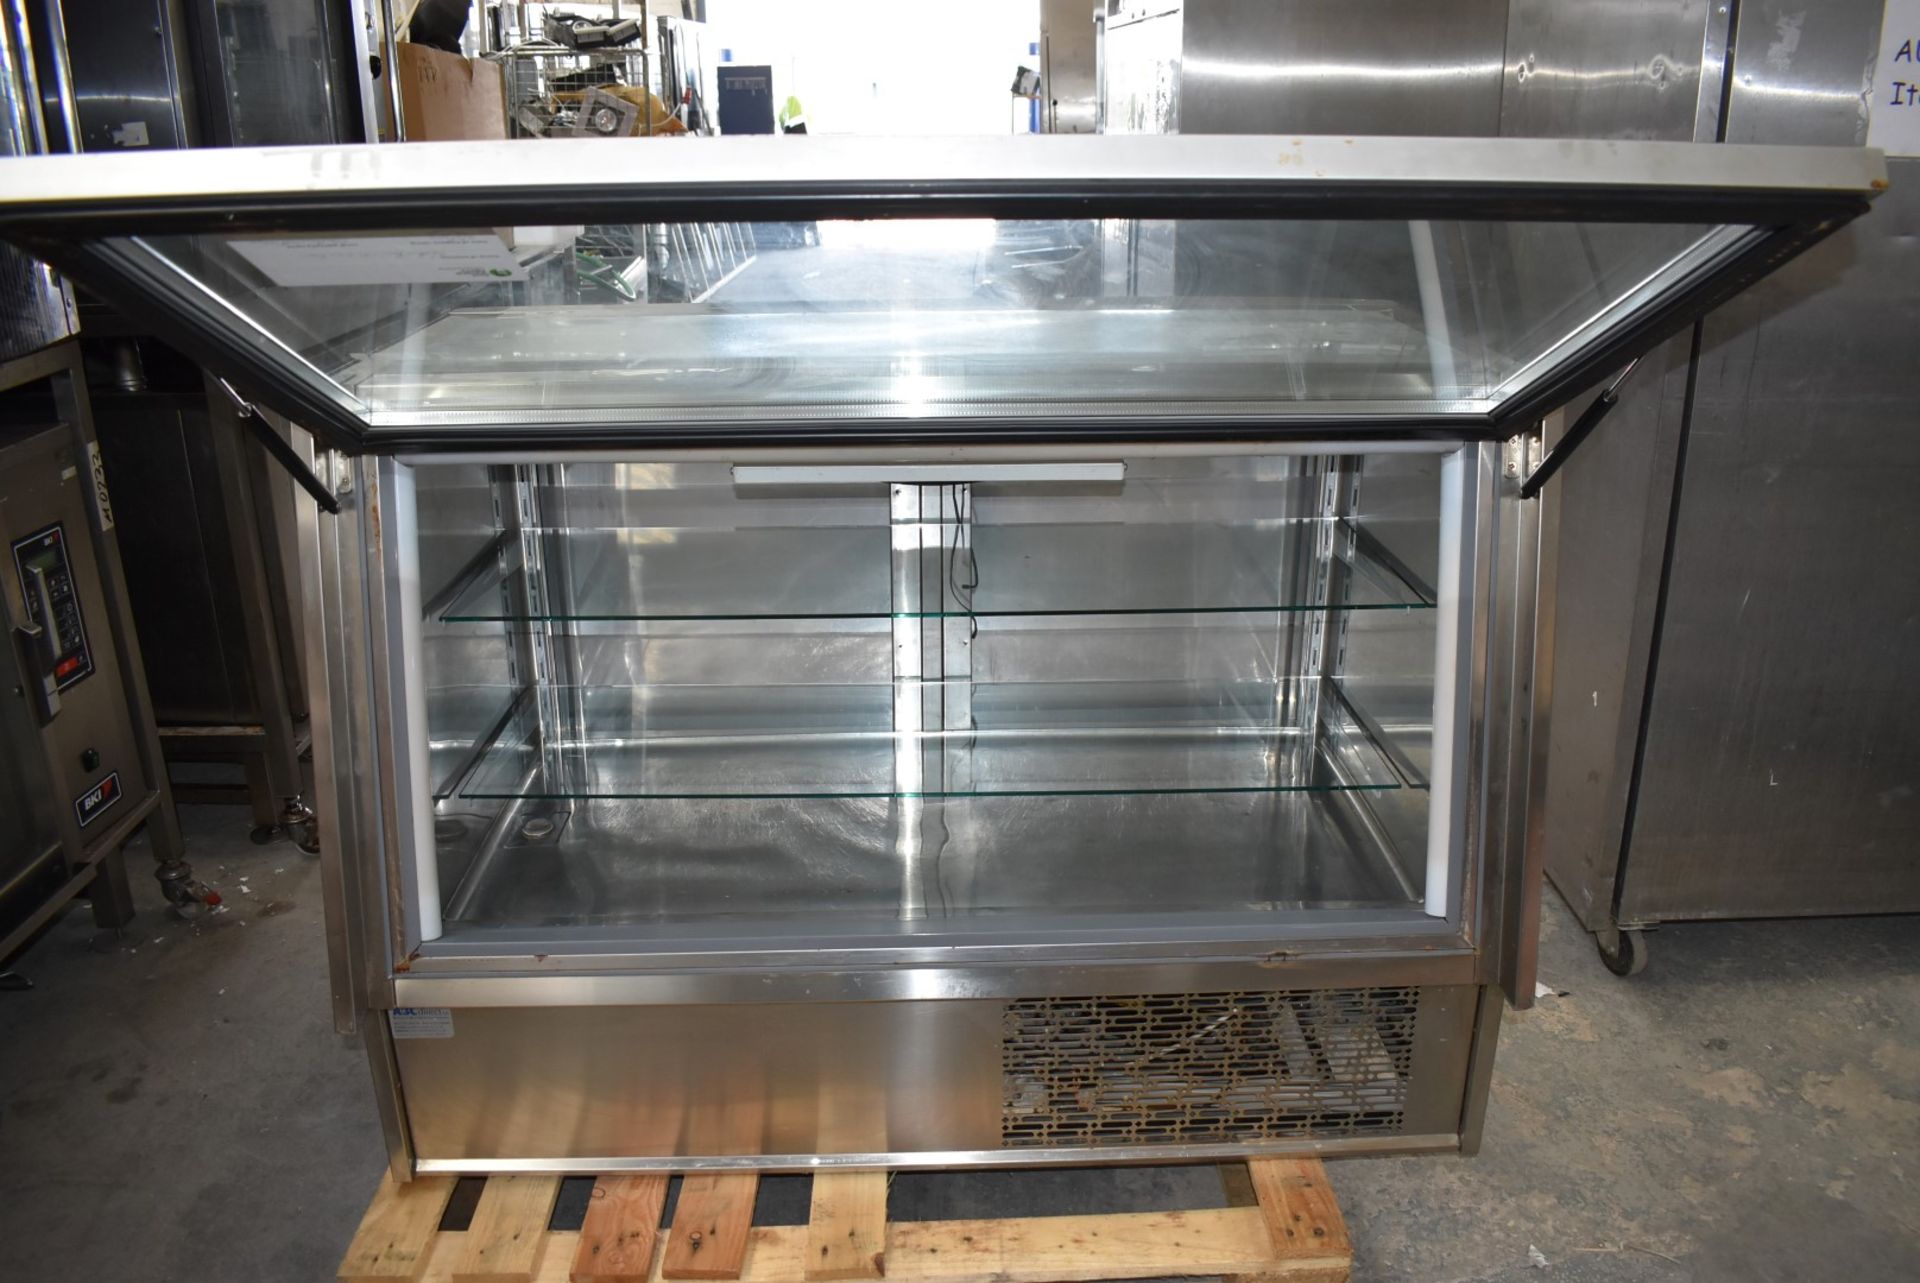 1 x Infrico 1.4m Refrigerated Vision Counter For Takeaways, Sandwich Shops or Cafes - RRP £3,200! - Image 3 of 21